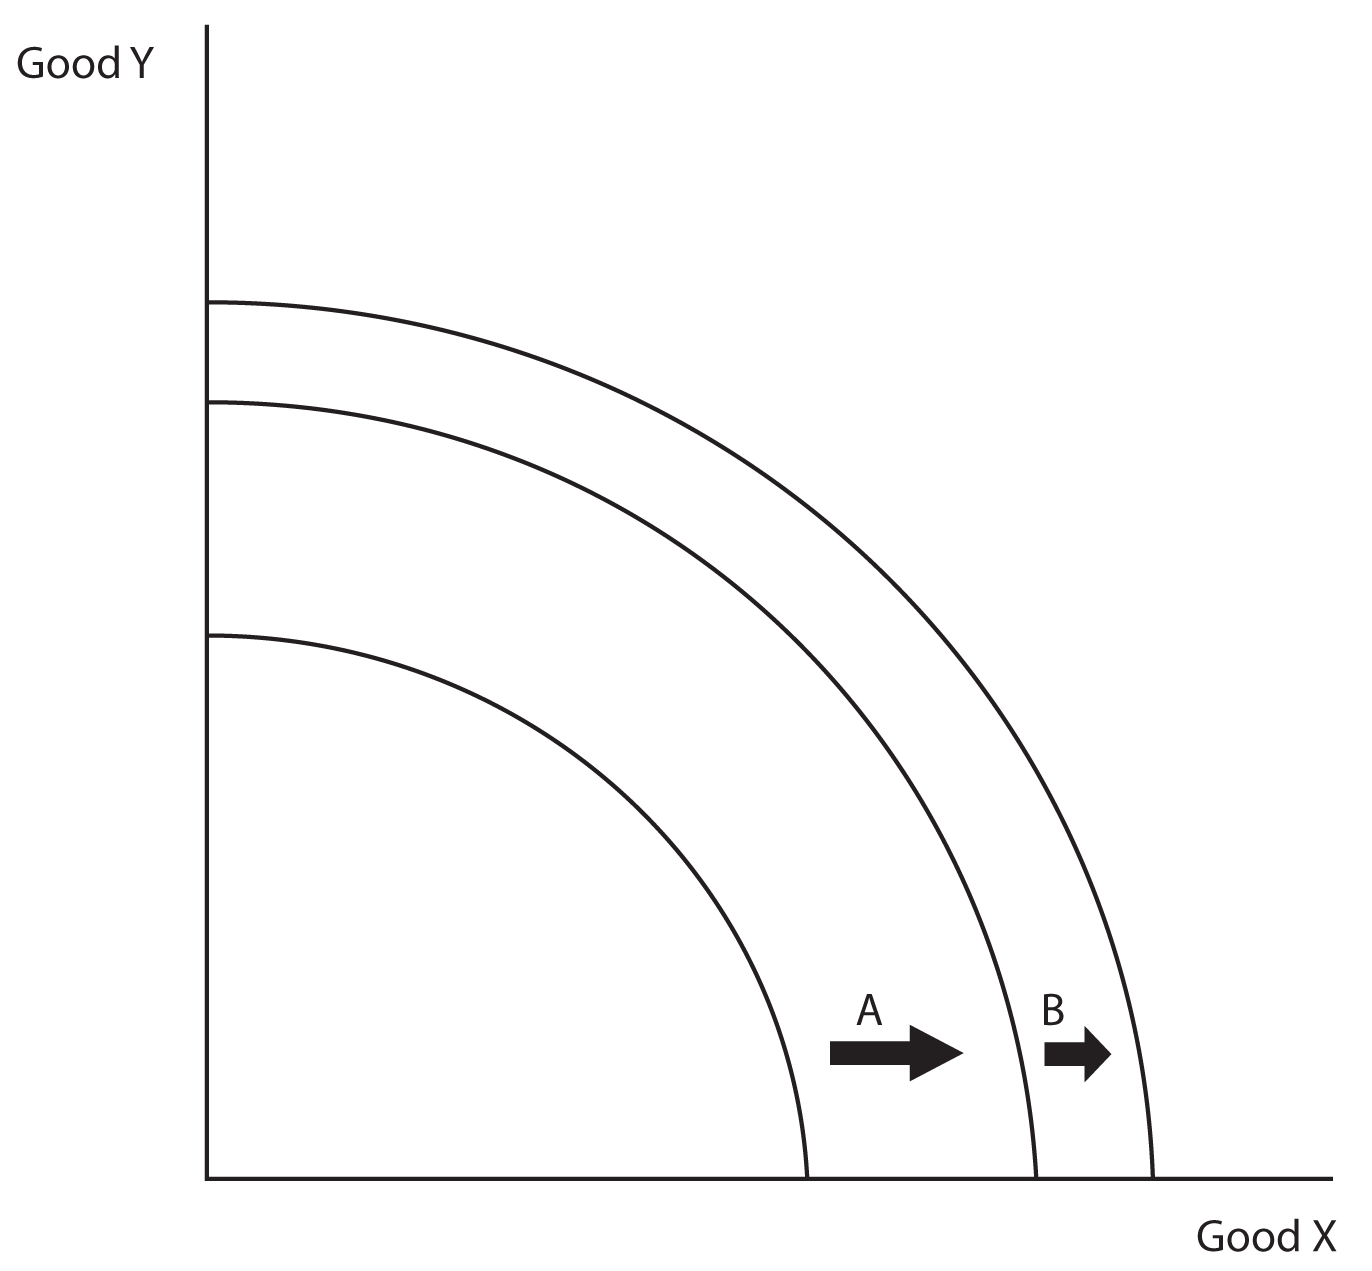 Image 4.01: This picture shows the first quadrant of a Cartesian coordinate system in which x and y are both represented by "good". There are three lines in this graph. All three lines have the shape of an up right quarter of a circle. The first line is closer to the center and has an arrow with the letter "A" above it, pointing to the next line. The next line is longer then the first and also has an arrow with the letter "B" above it, pointing to the next line. The last line is longer than the previous and has no lines after it.